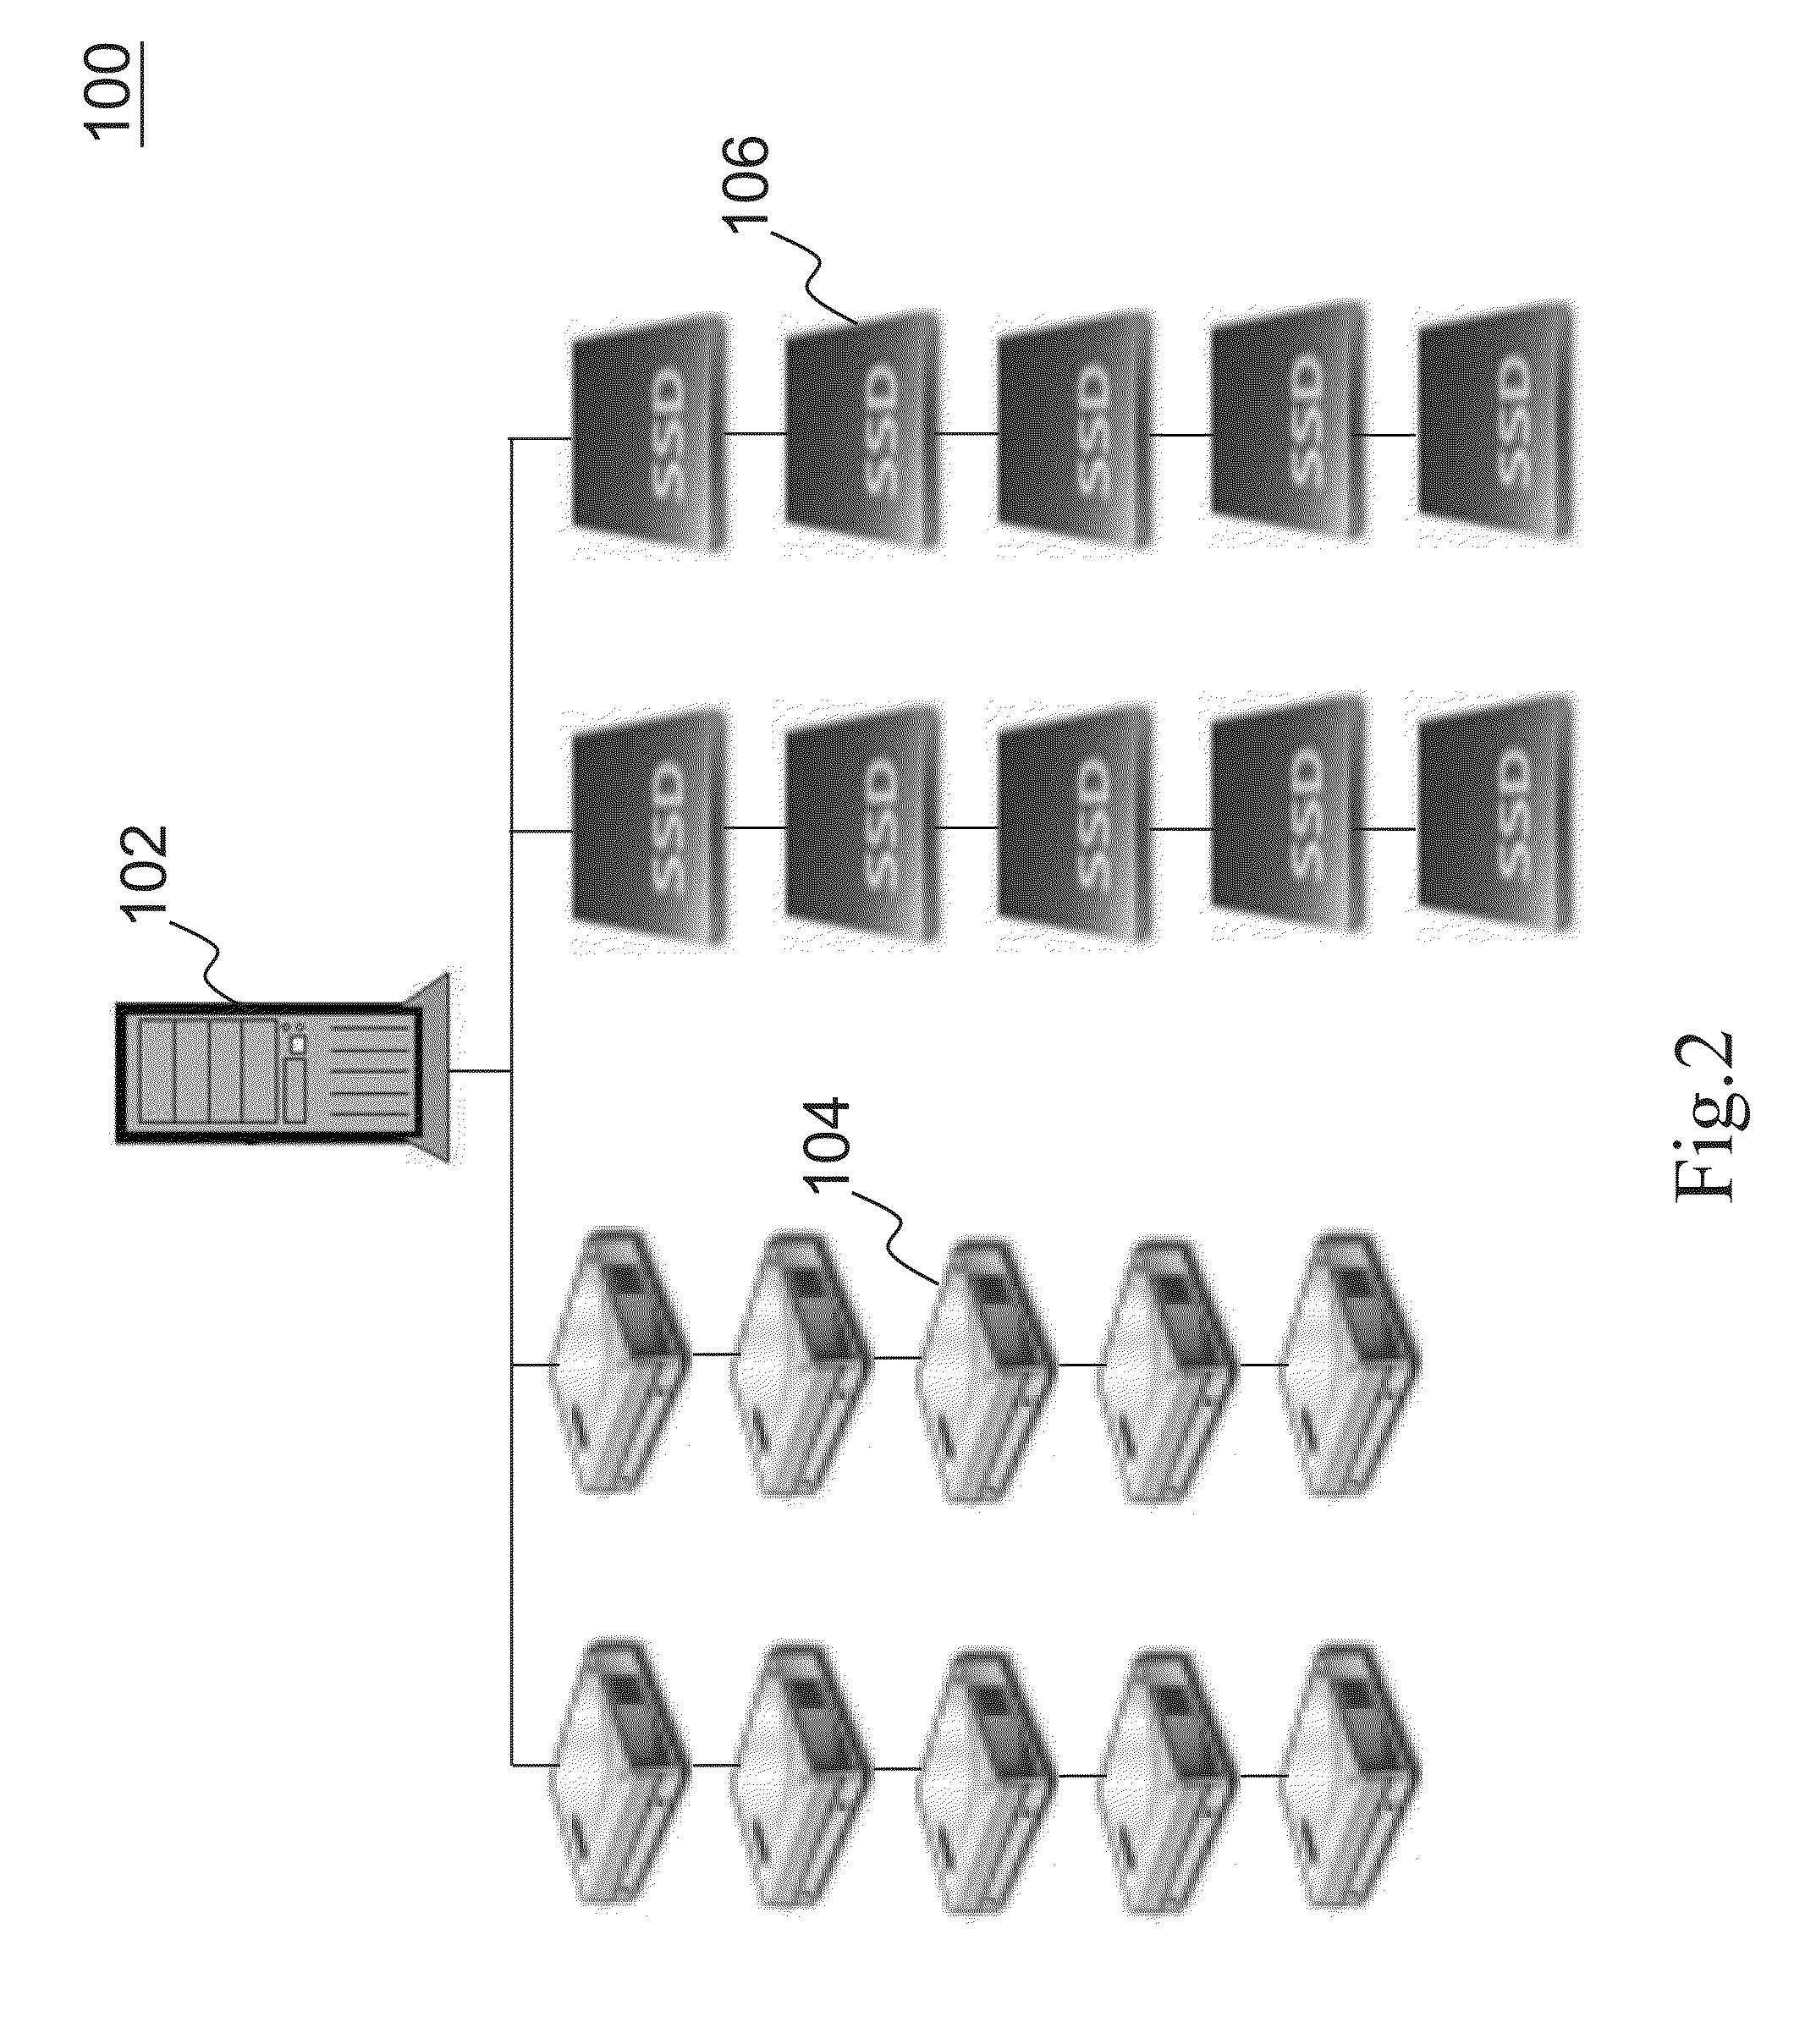 Adaptive quick response controlling system for software defined storage system for improving performance parameter